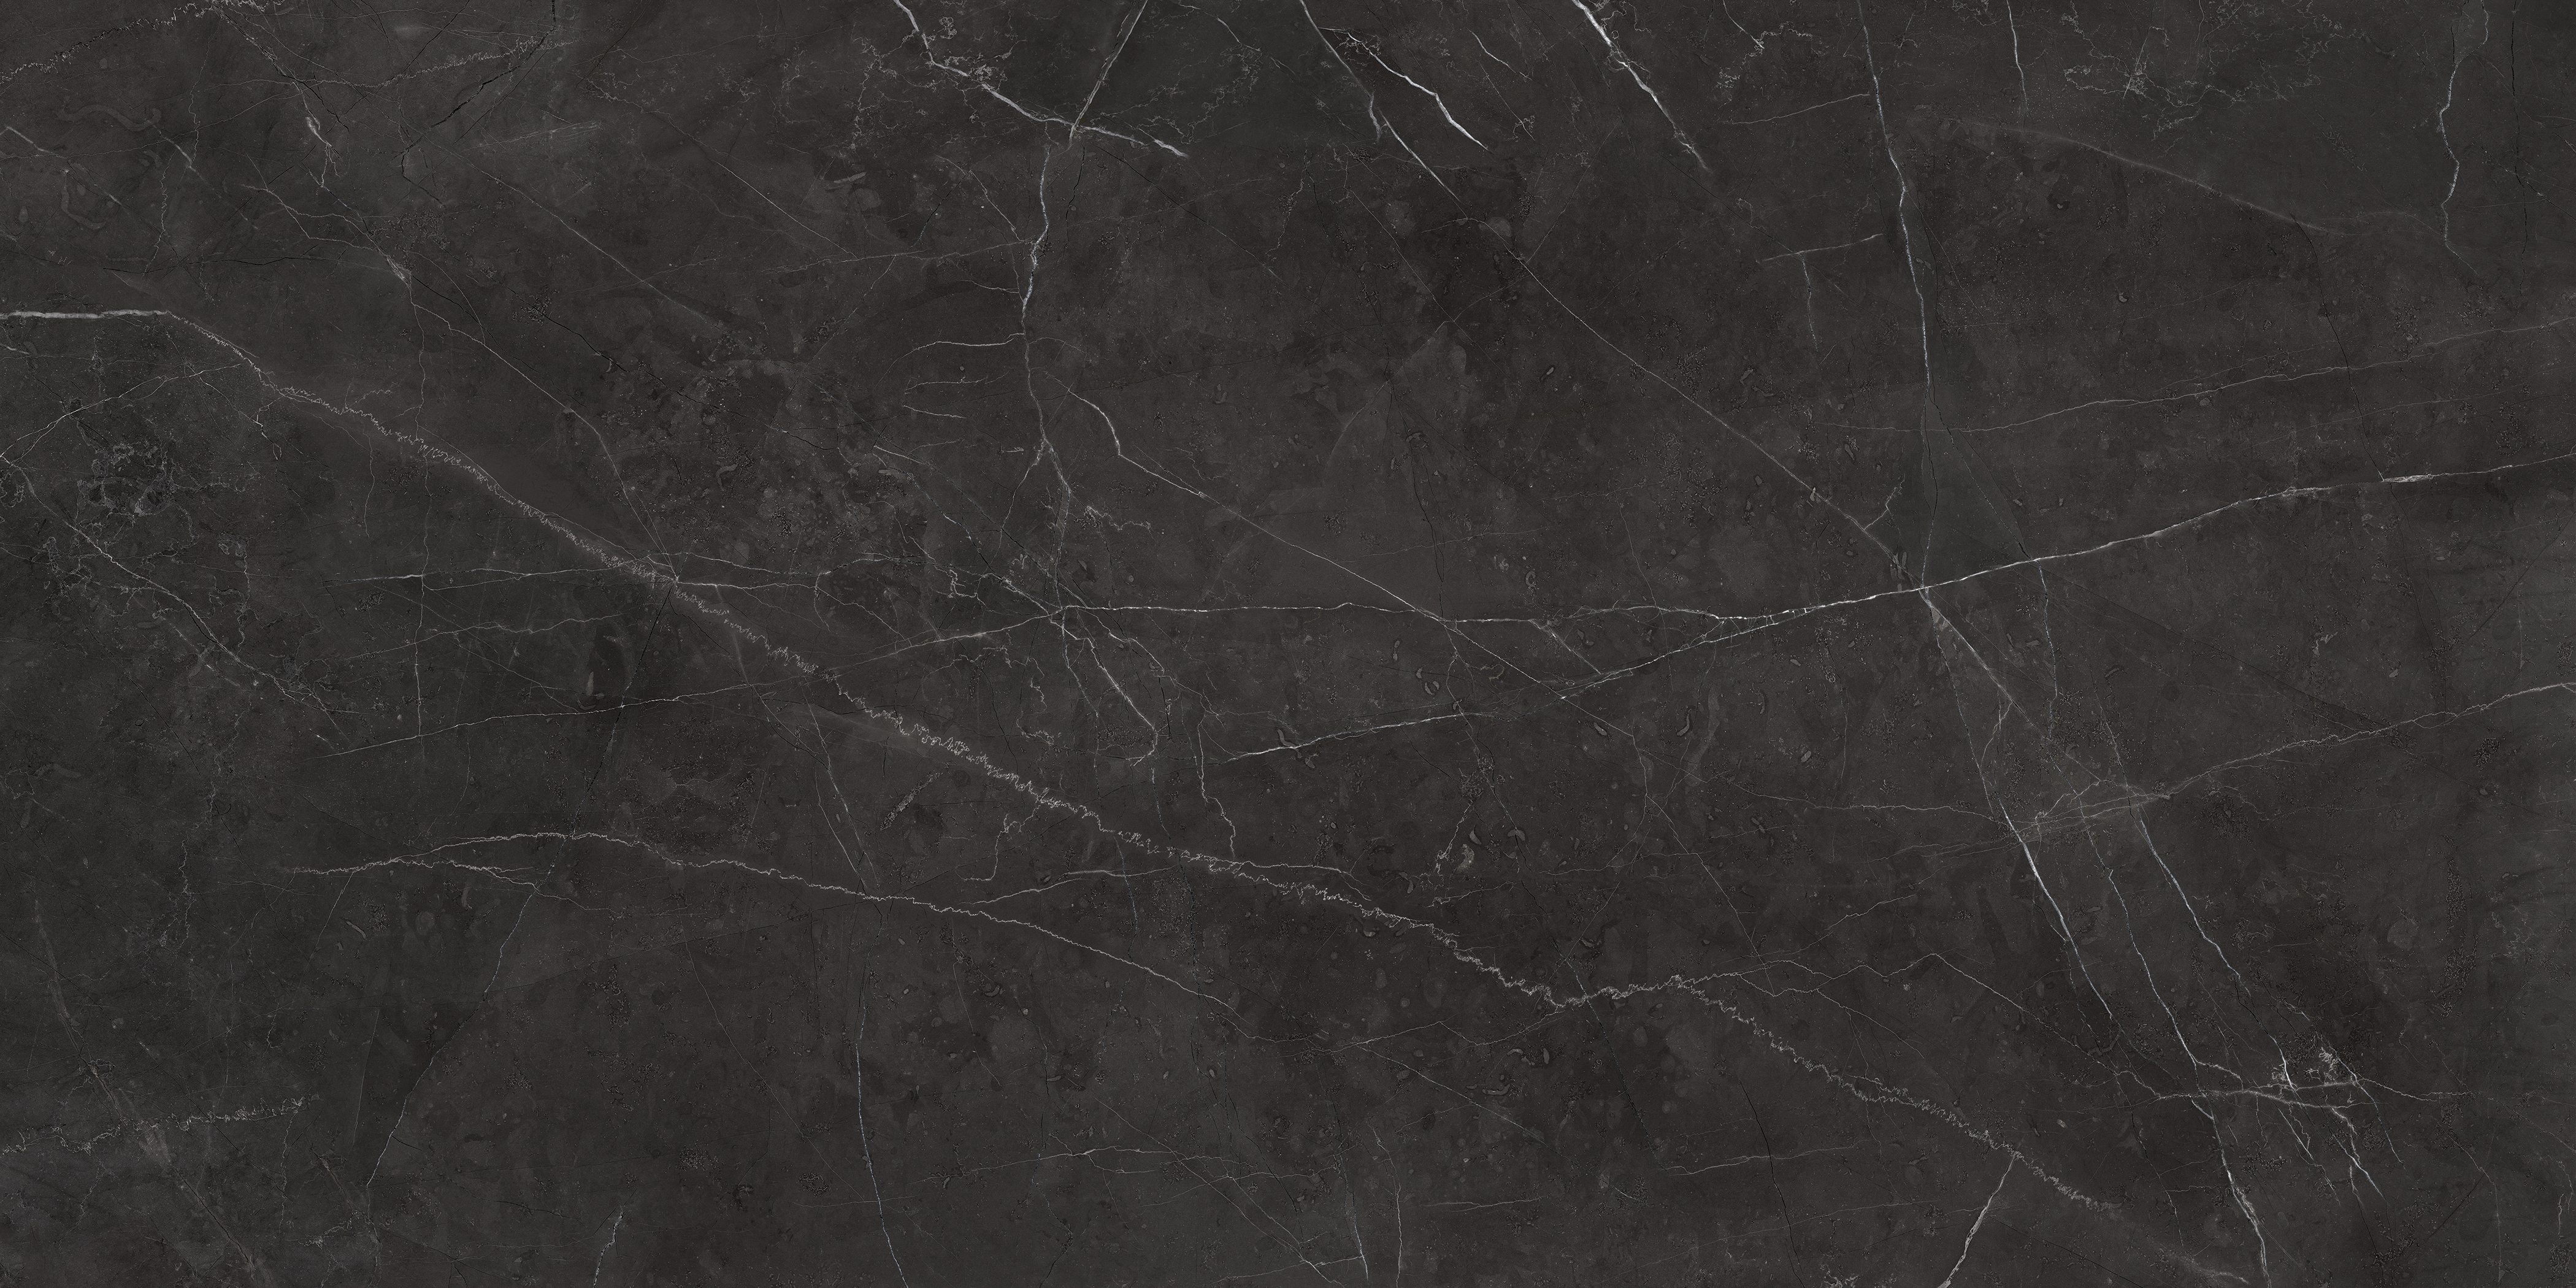 nero venato pattern glazed porcelain field tile from la marca anatolia collection distributed by surface group international honed finish rectified edge 24x48 rectangle shape